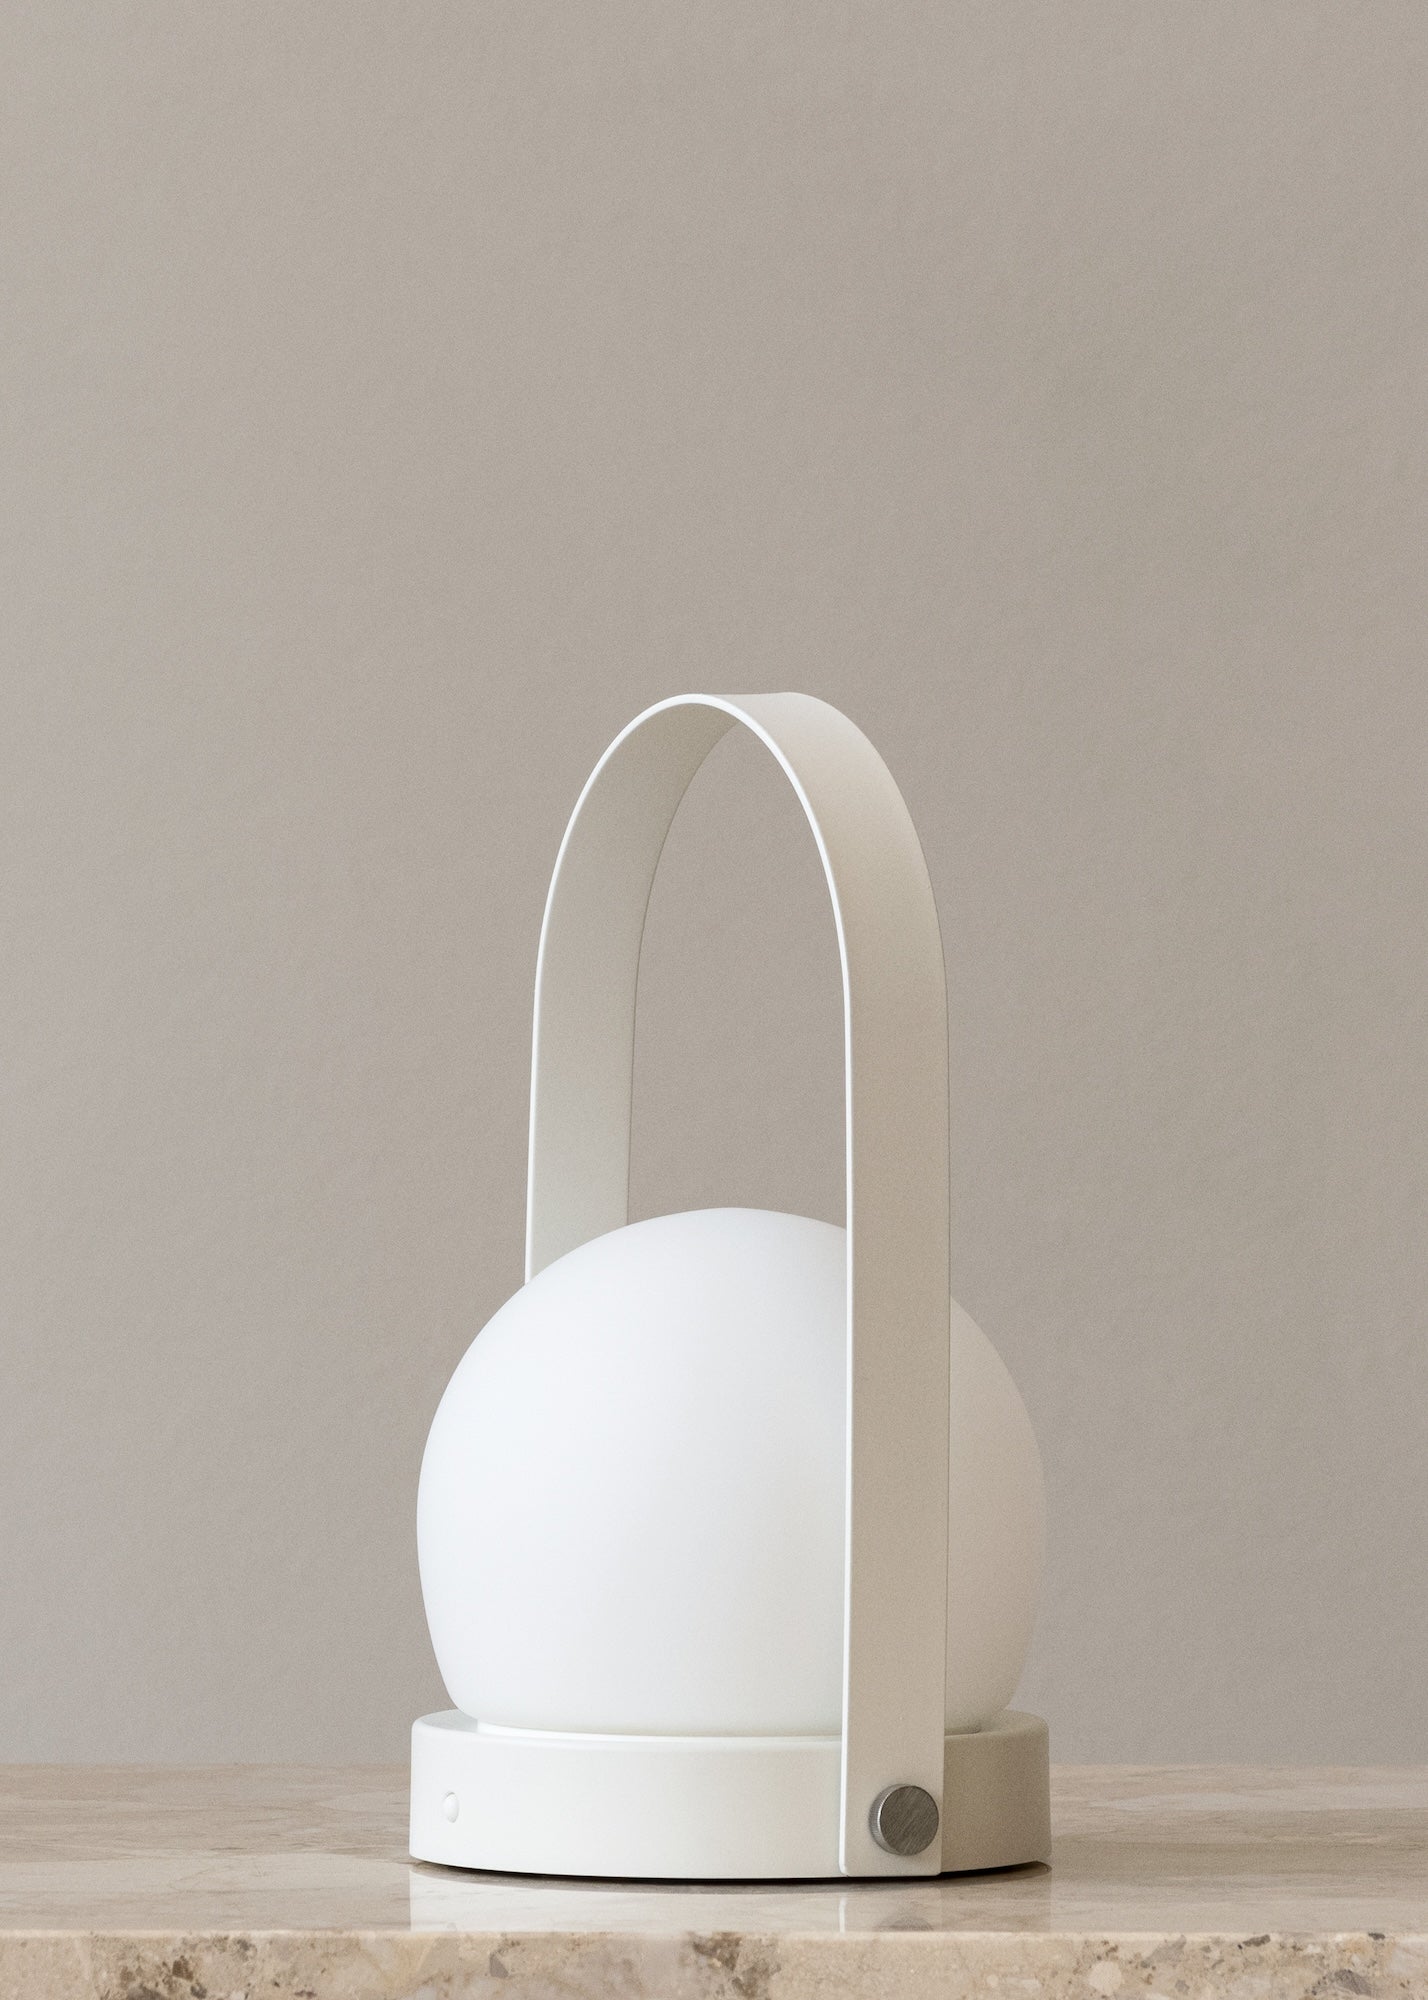  Analyzing image     MENU_Carrie_Table_Lamp_10_1  1428 × 2000px  Column Portable Lamp White, designed by Norm Architects for Audo Copenhagen (Menu) lights off